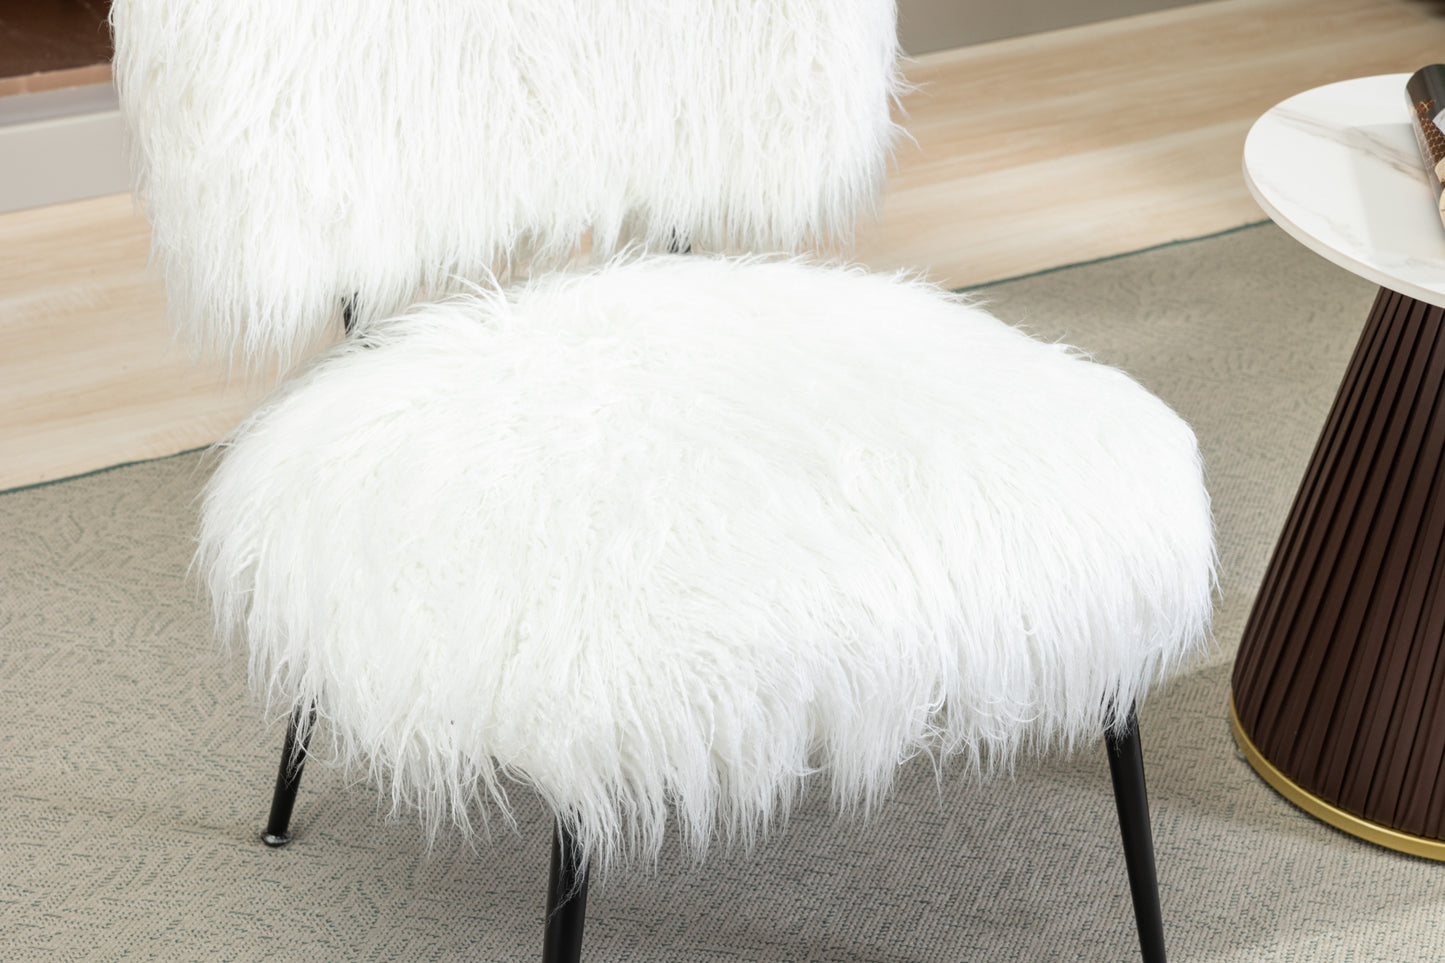 Megan Ivory Faux Fur Plush Accent Chair with Ottoman